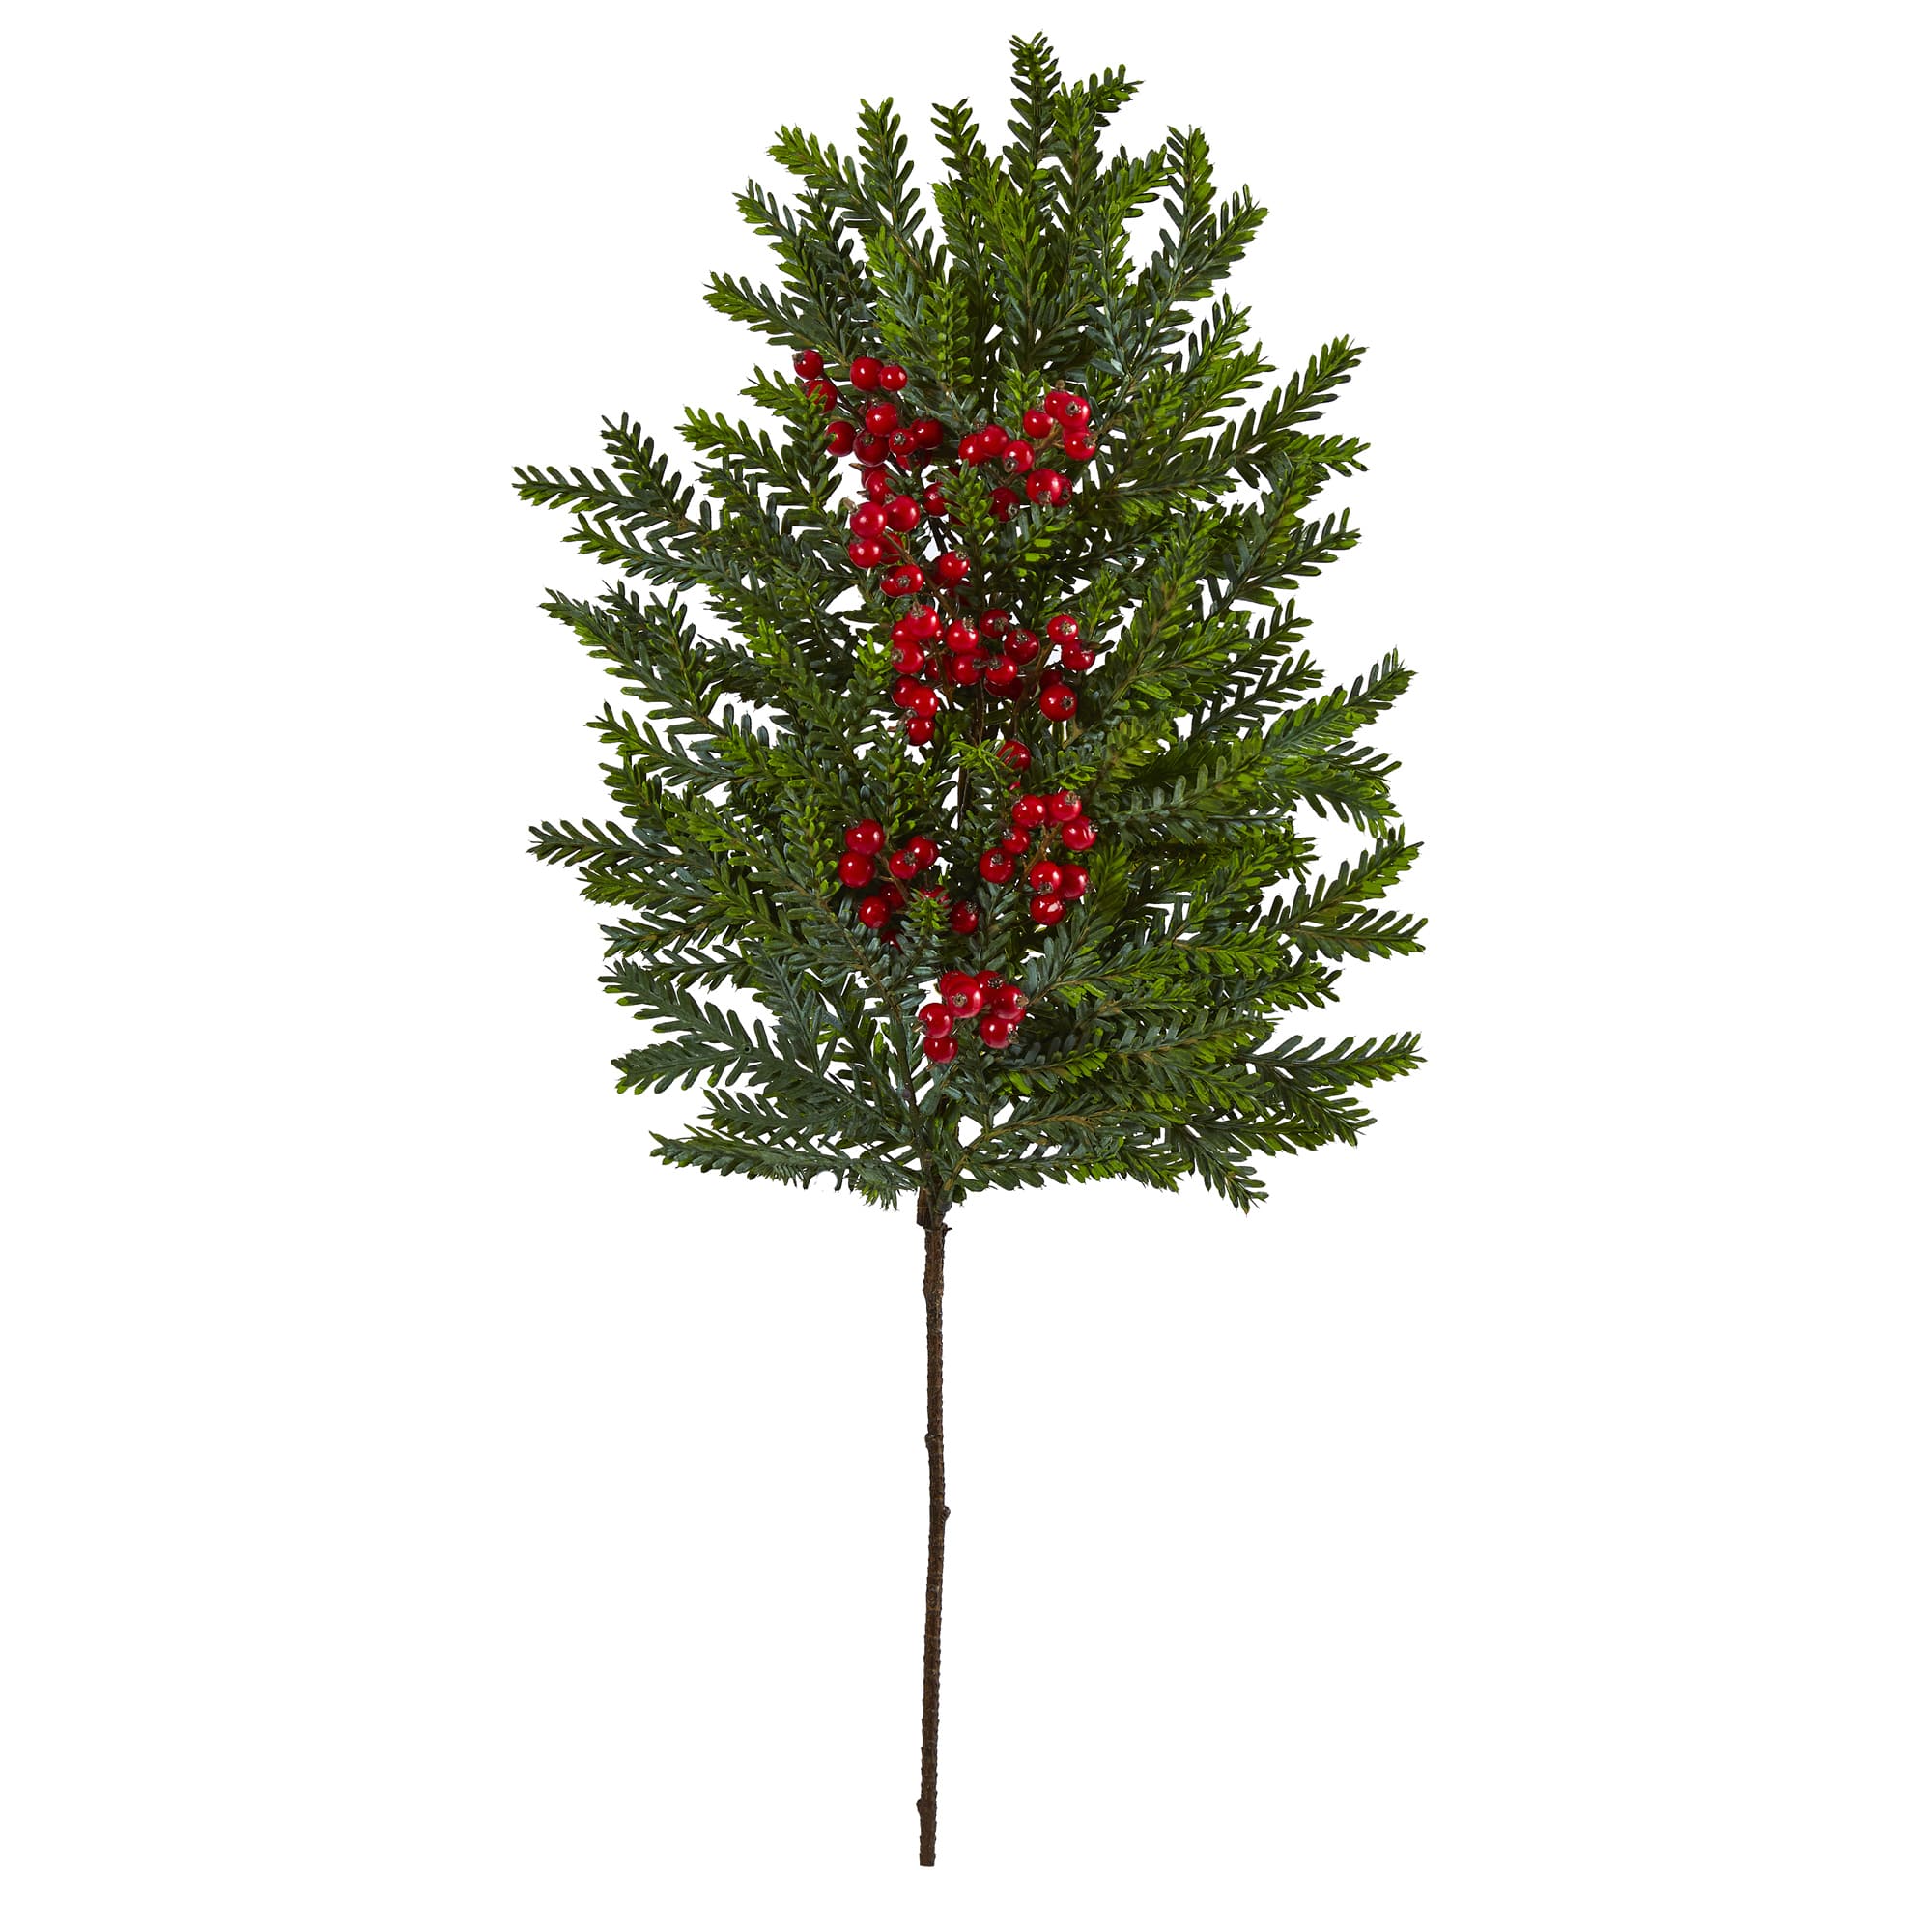 Set of 24: White Holly Berry Stems with 35 Lifelike Berries